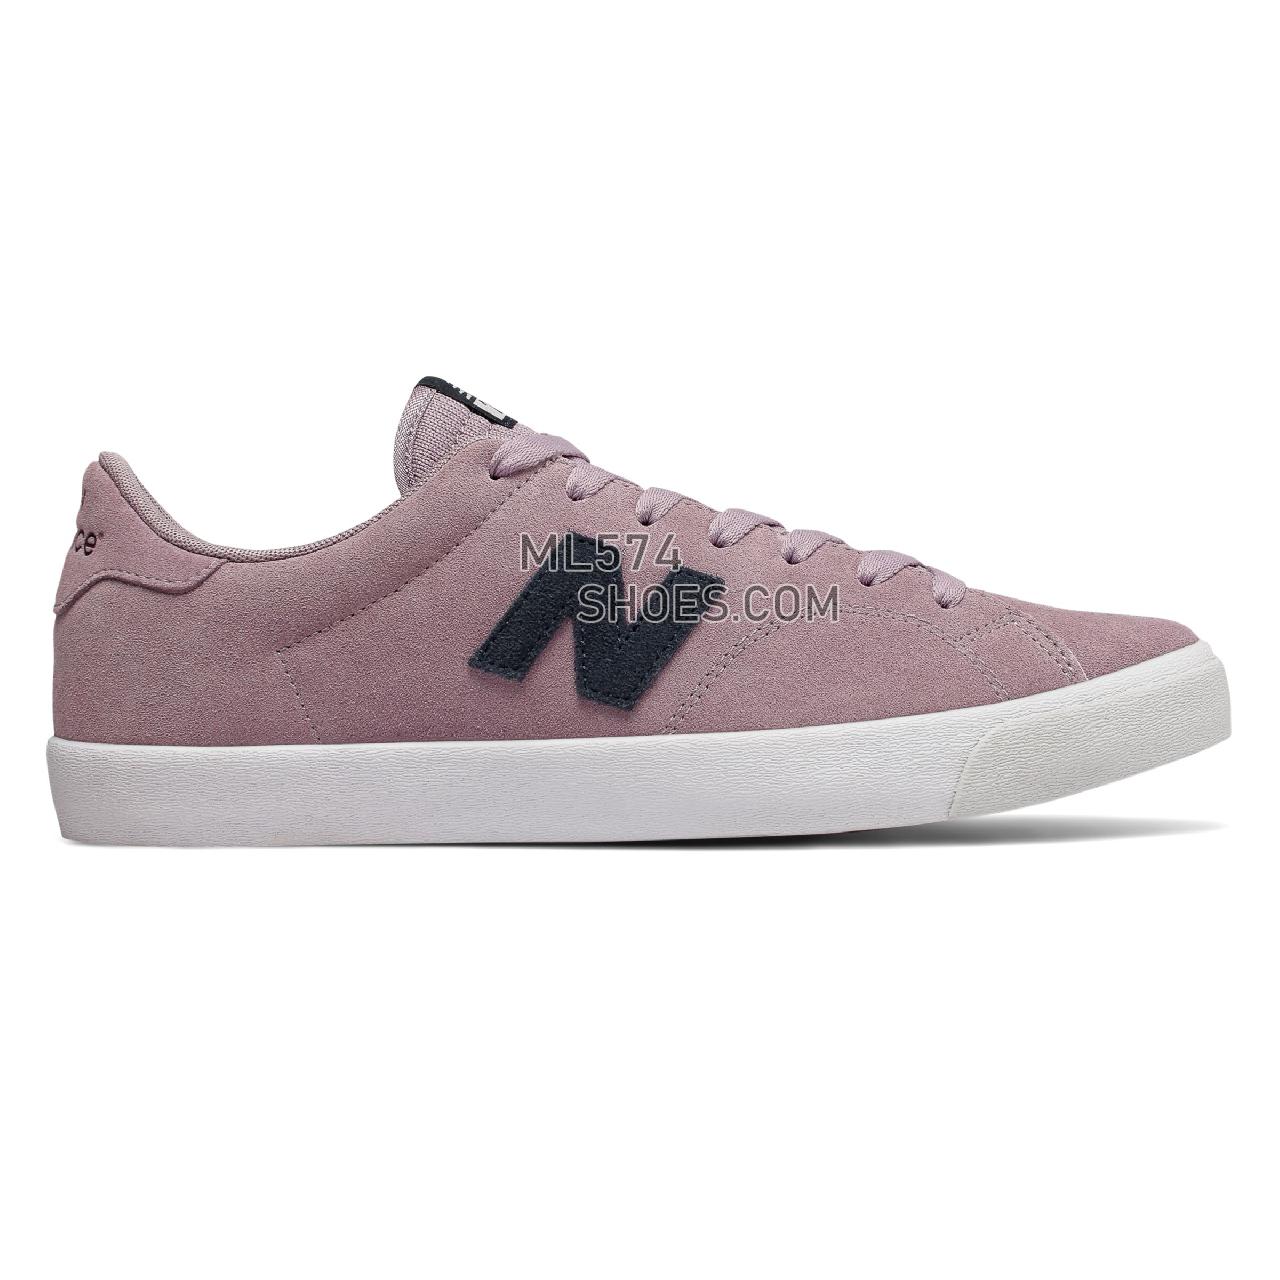 New Balance All Coasts 210 - Men's All Coasts 210 Classic AM210-L - Pink with Navy - AM210PRR